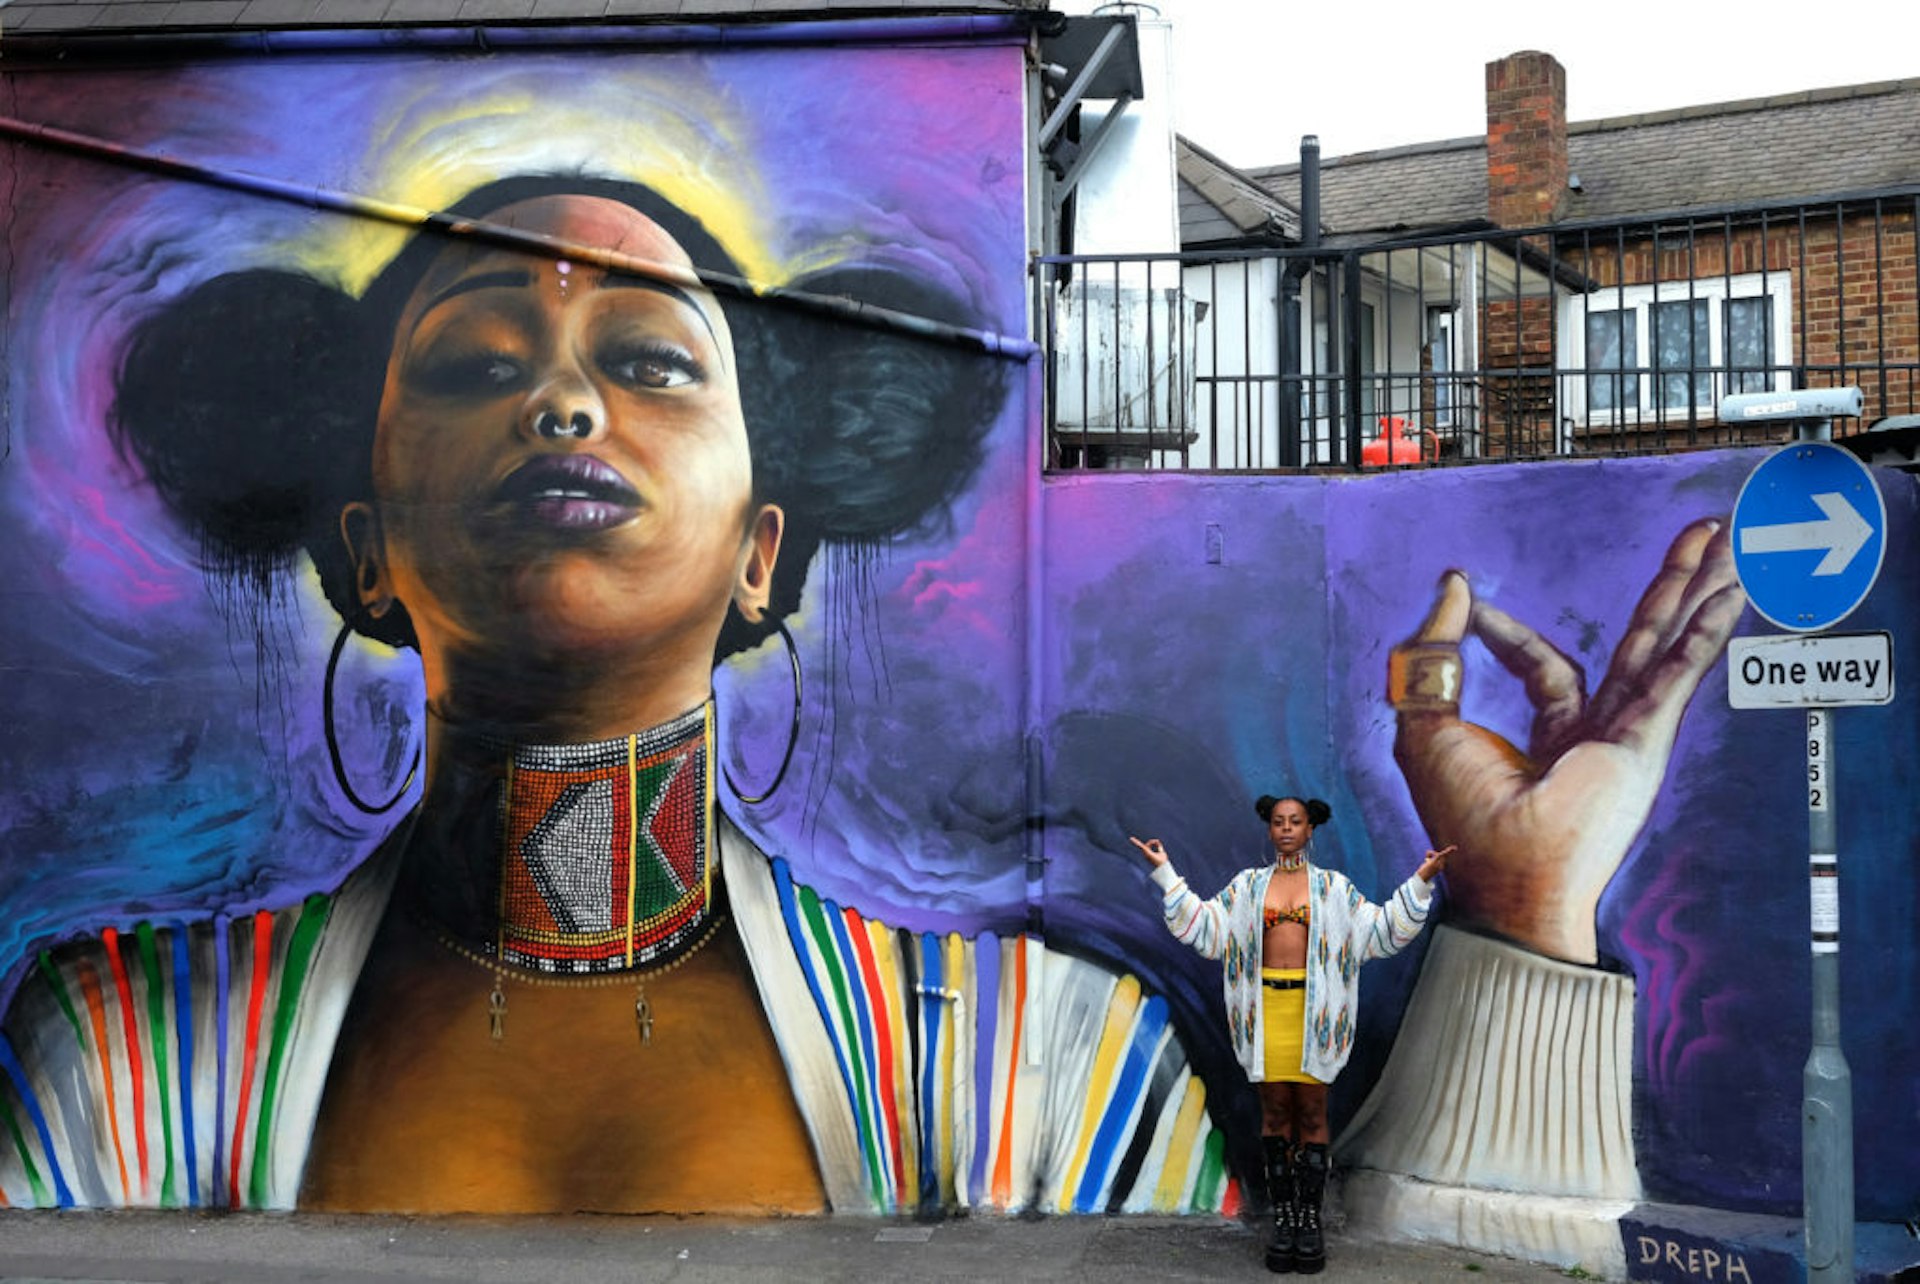 Why giant murals of black women are popping up across London